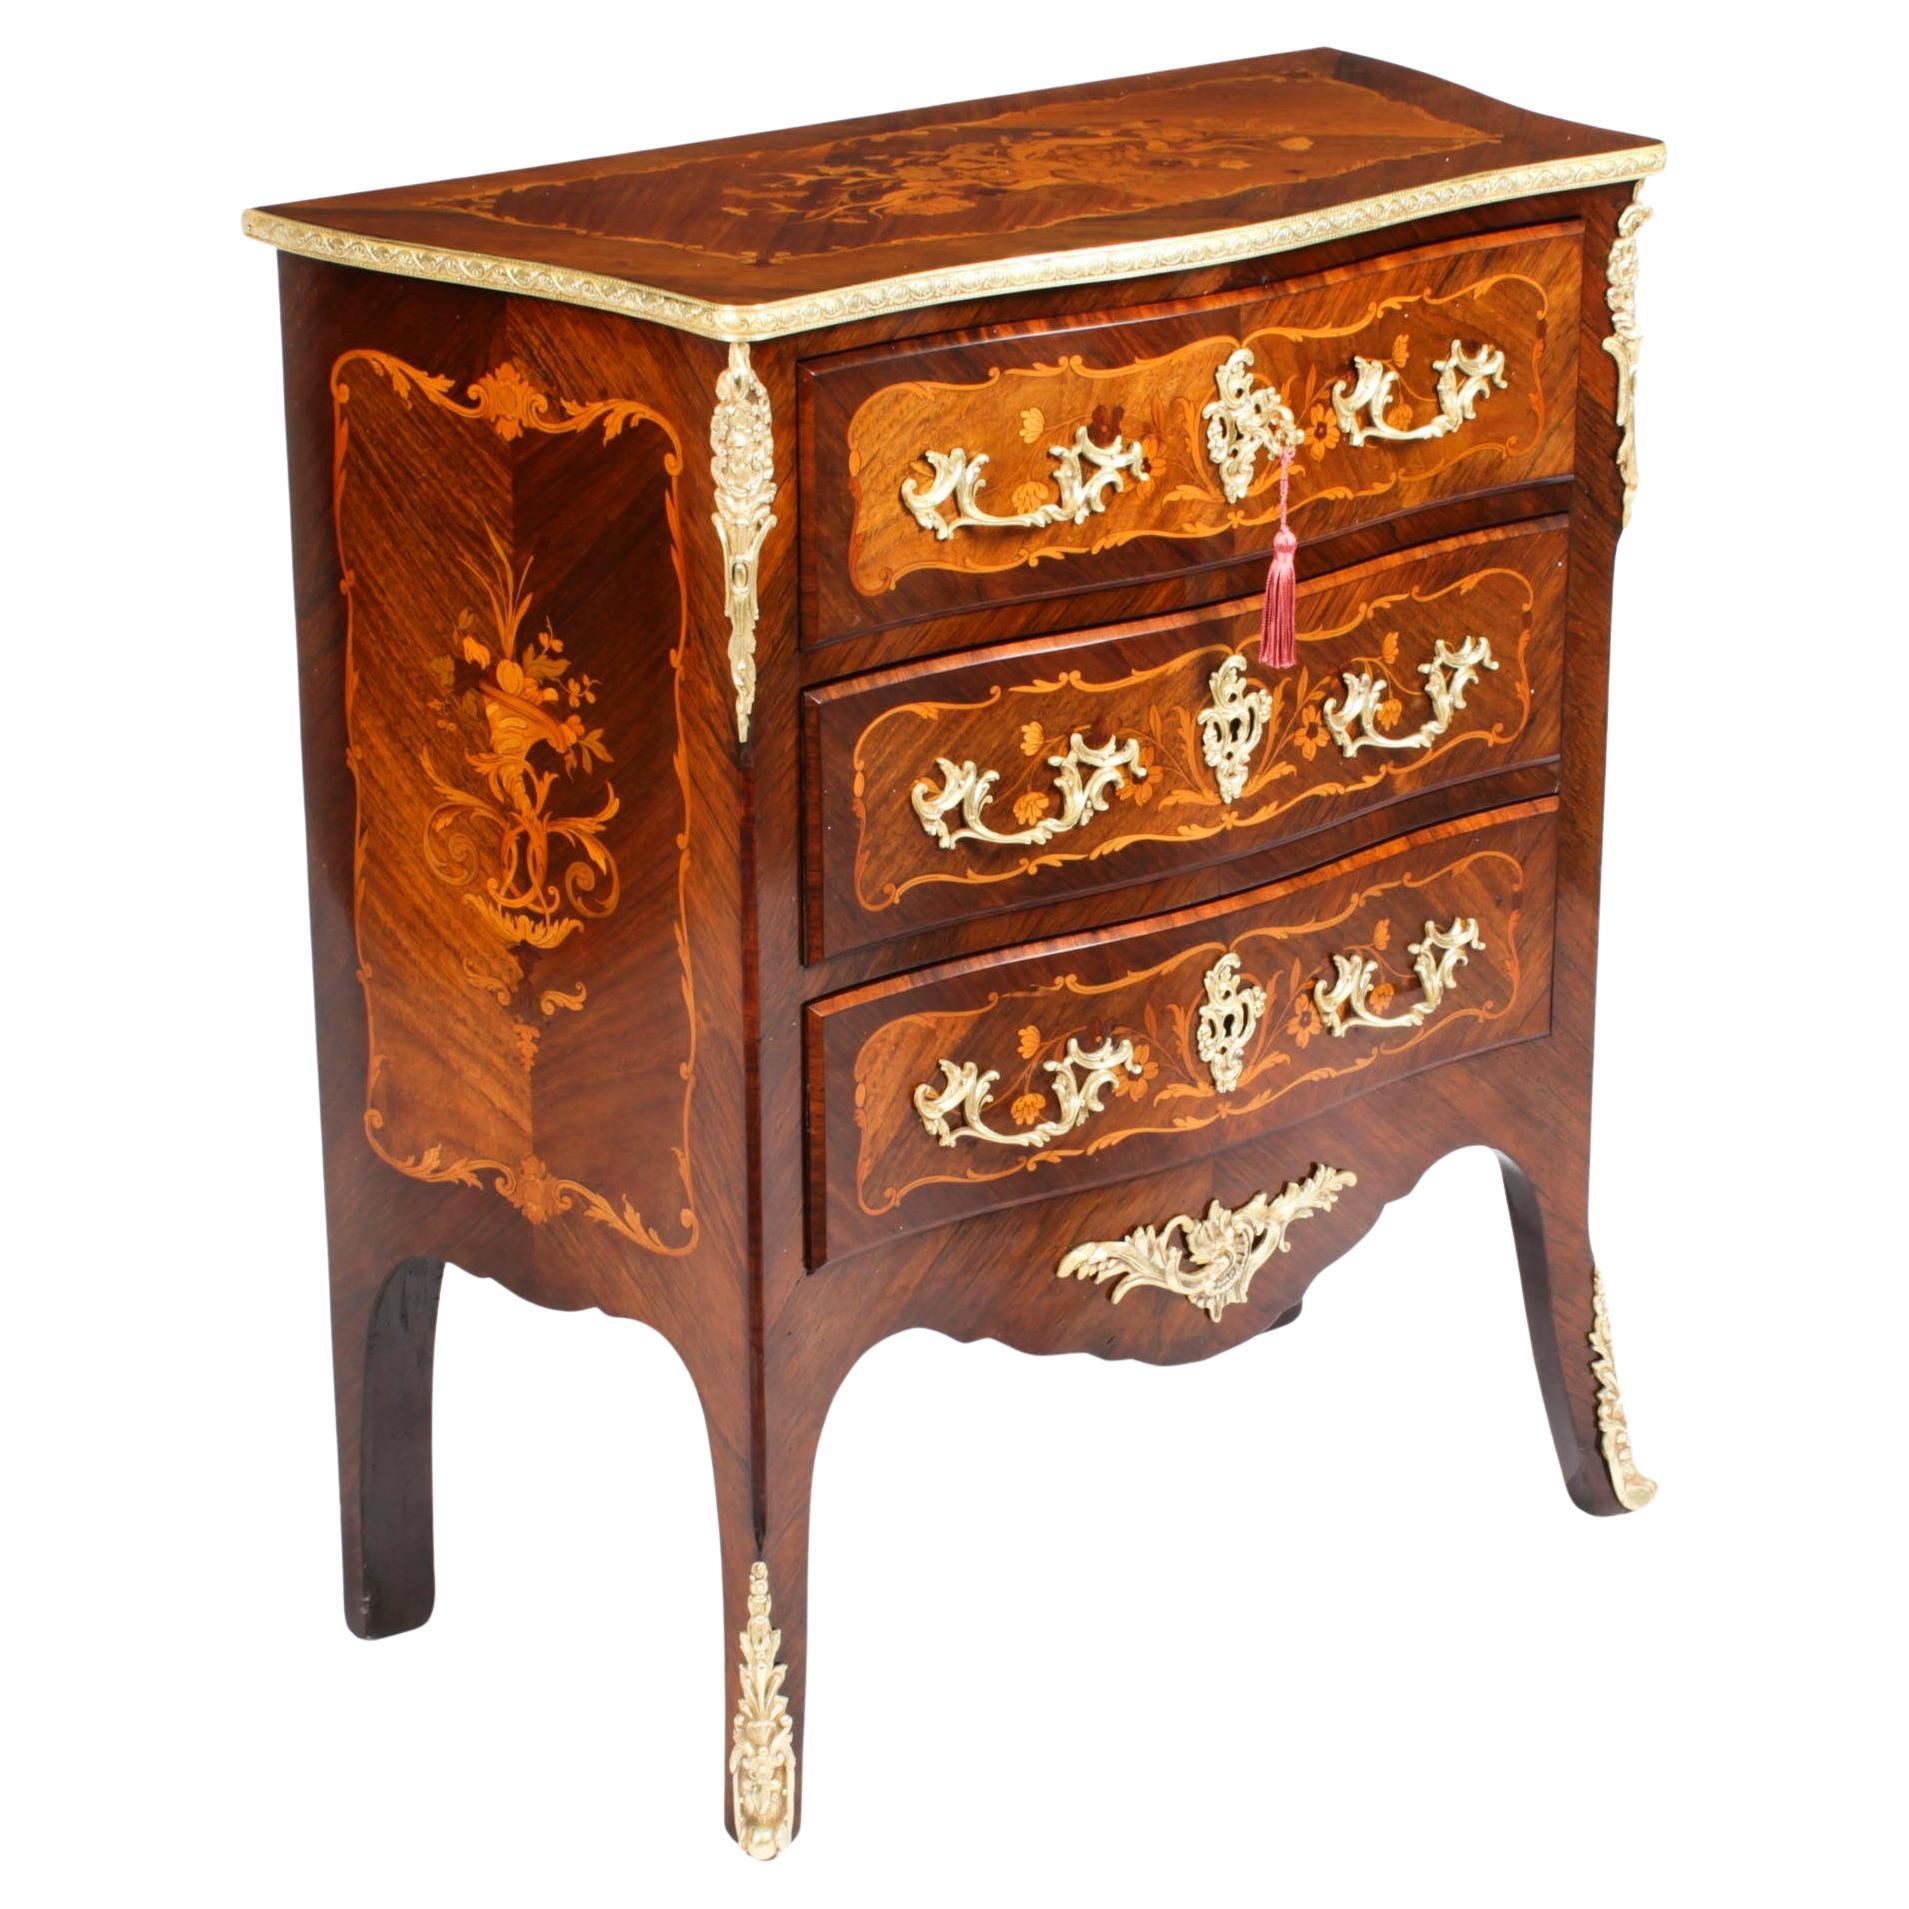 Antique French Louis Revival Marquetry Commode, 19th Century